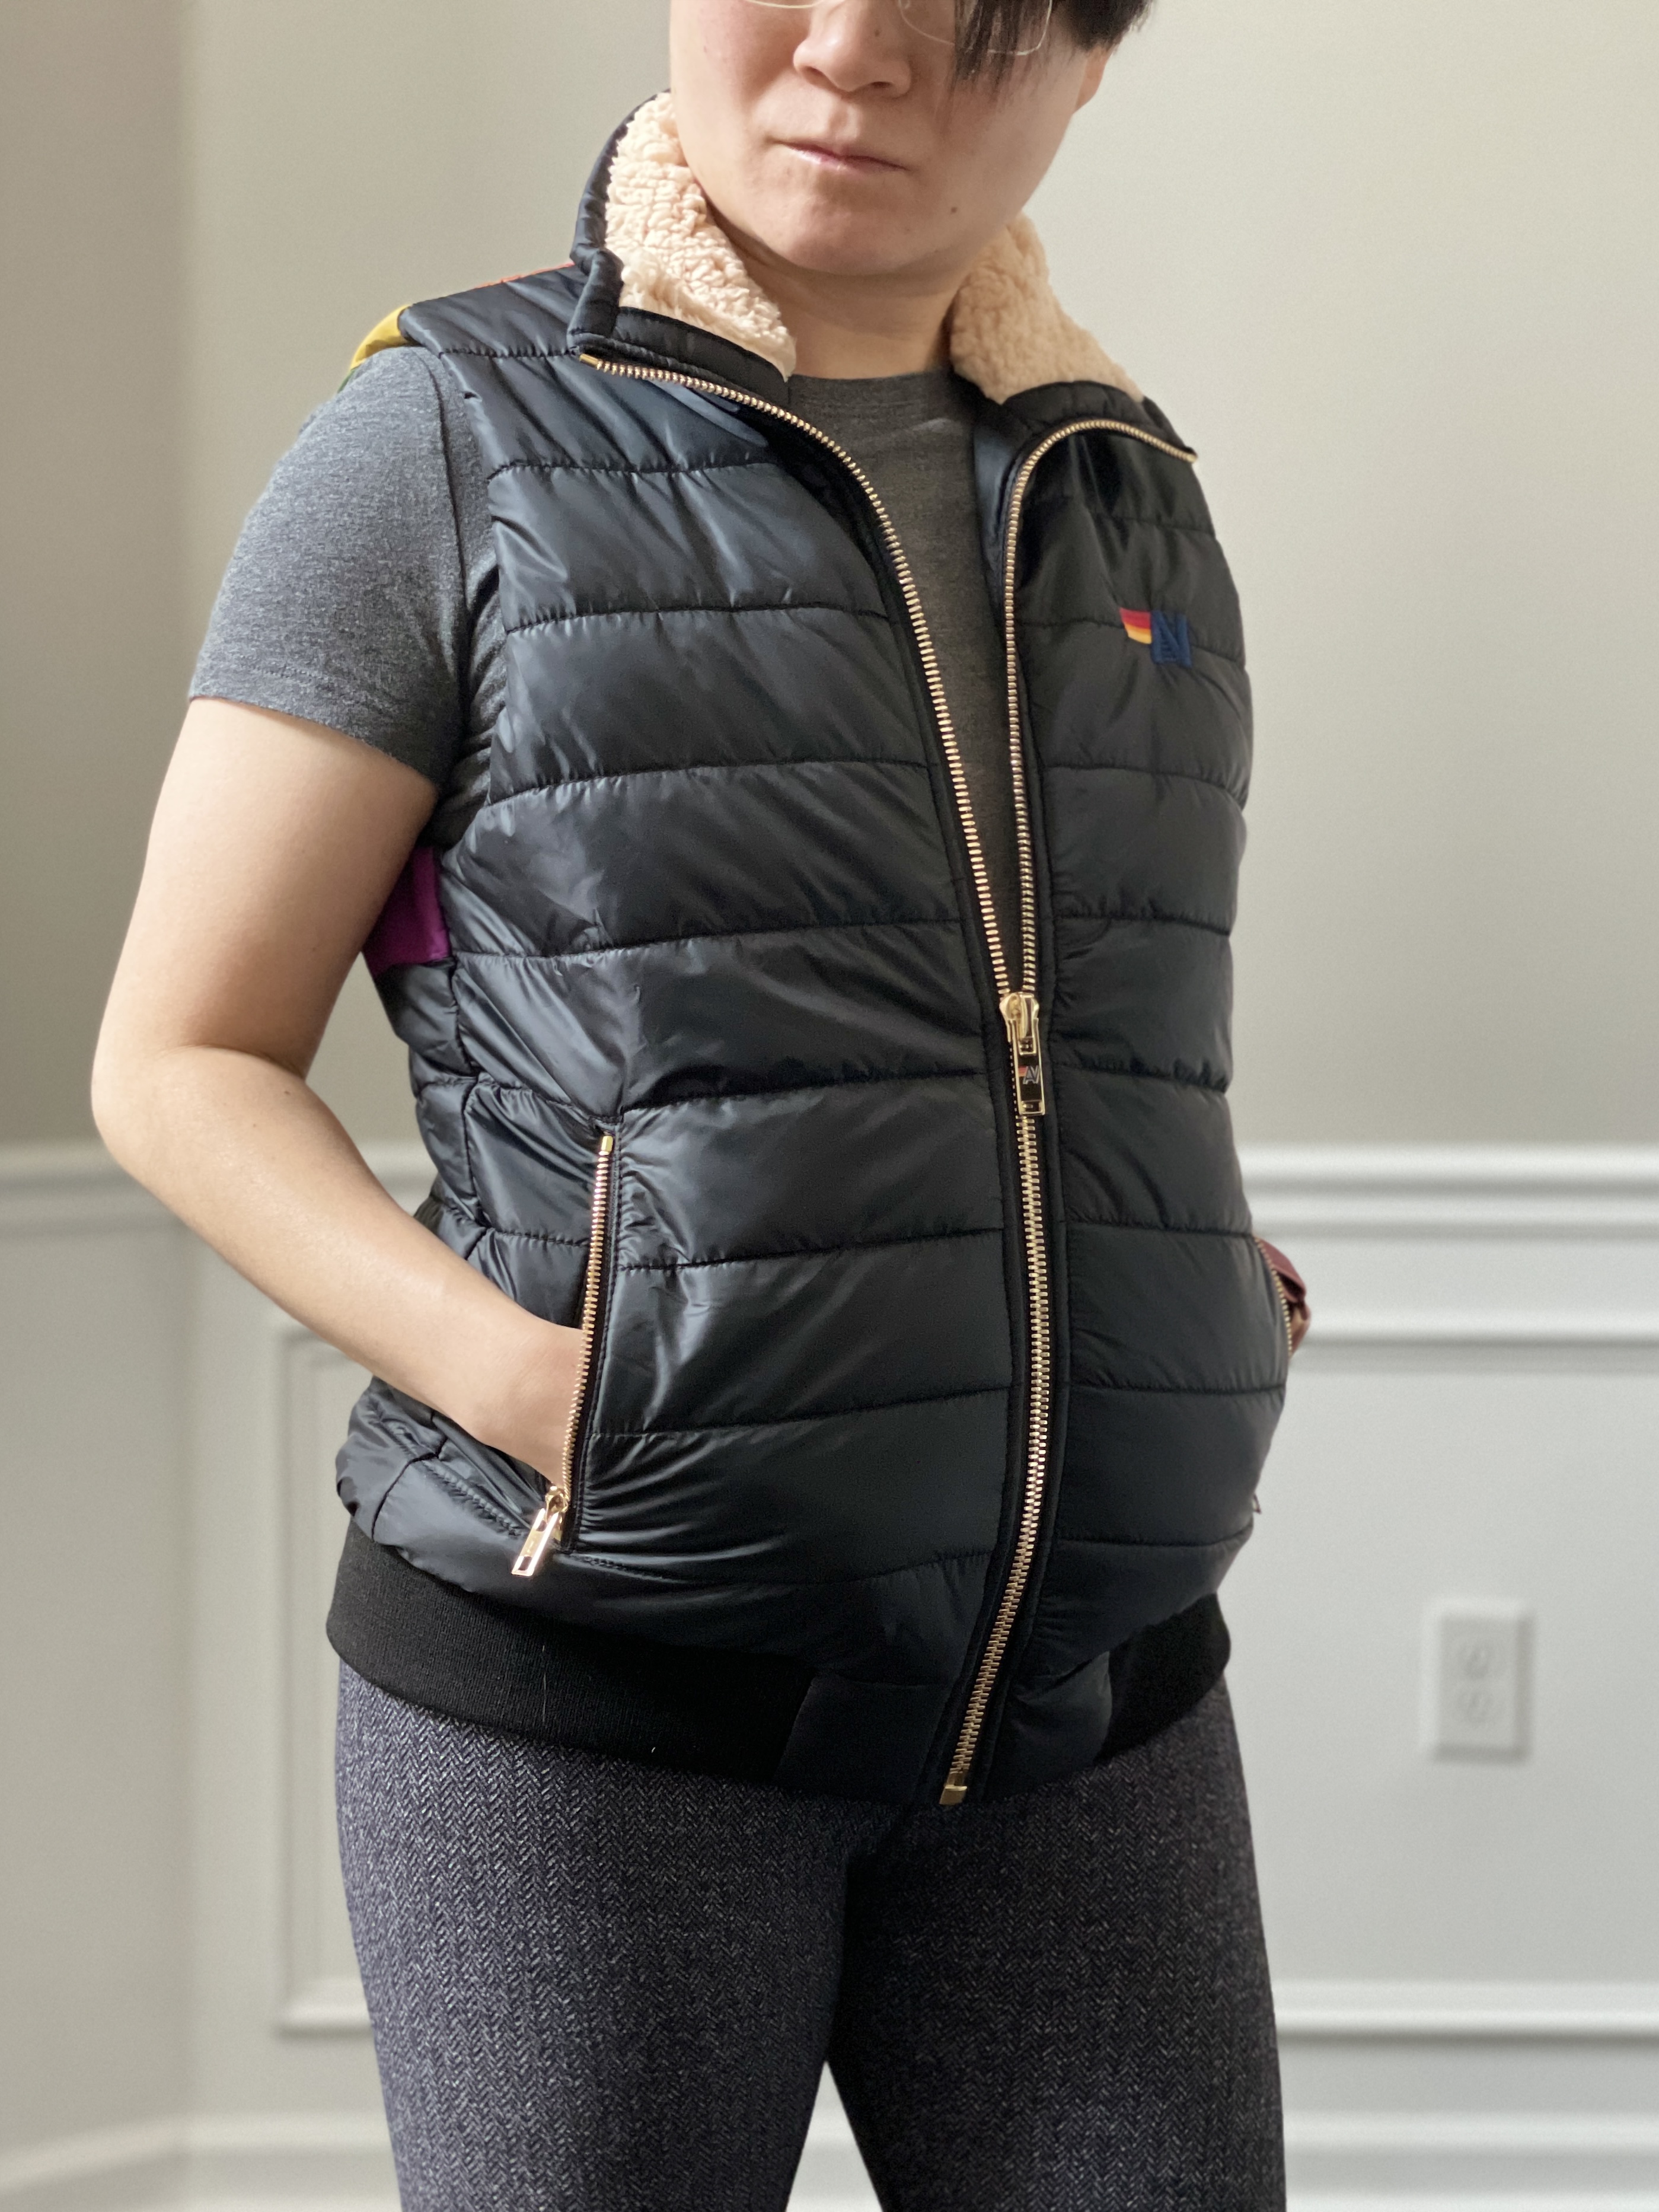 Fit Review Friday! Battle of the Vests! Wunder Puff Cropped Vest